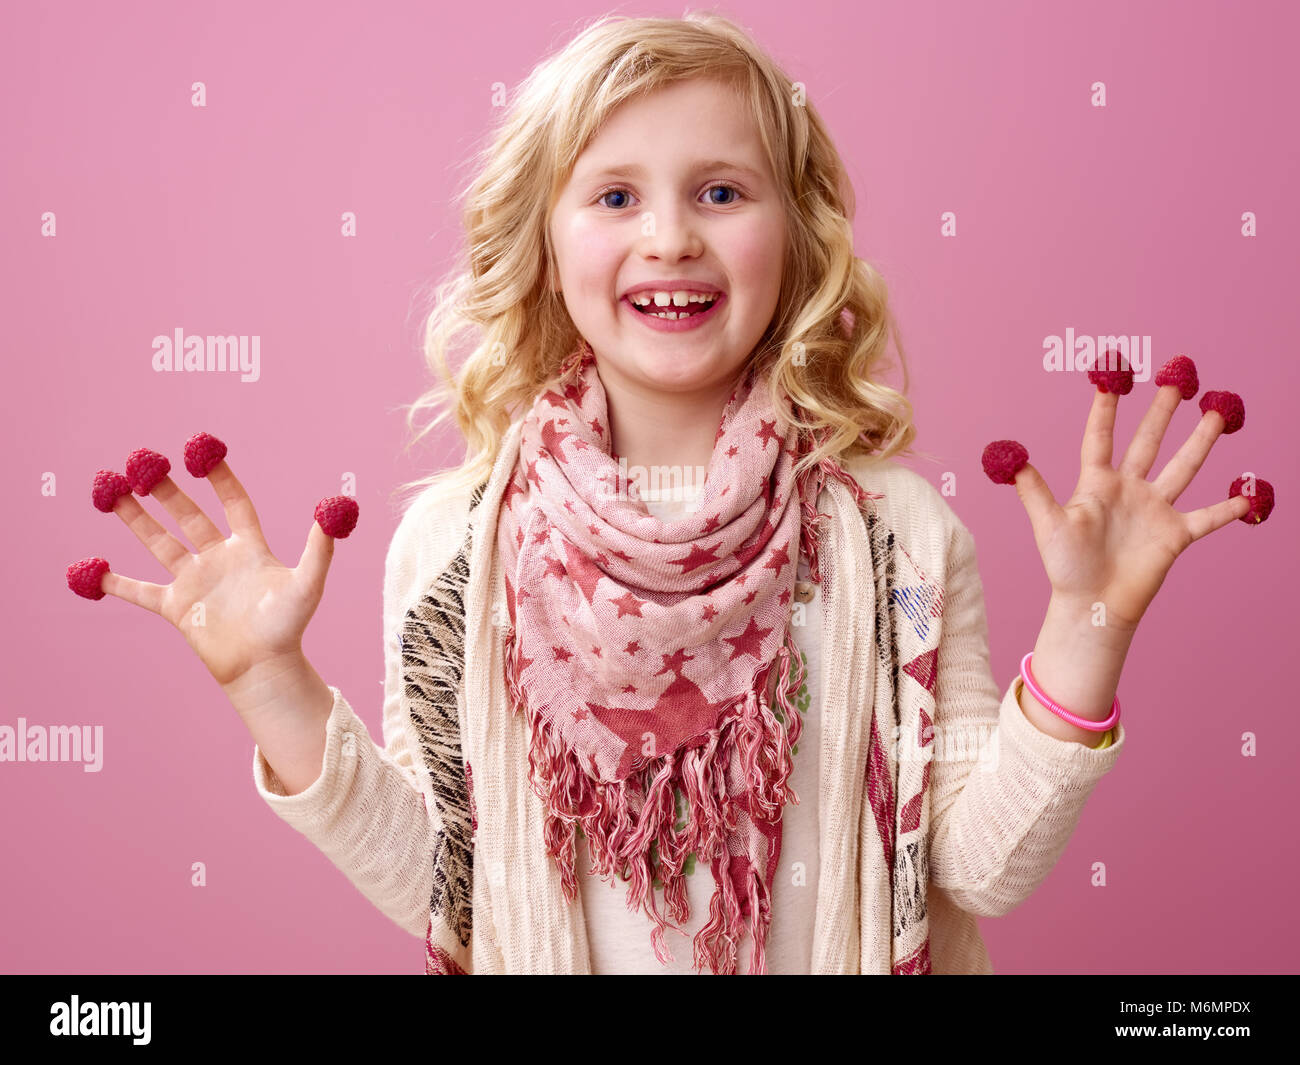 5. Wavy Blonde Hair Girl Stock Photos, Pictures & Royalty-Free Images - iStock - wide 7